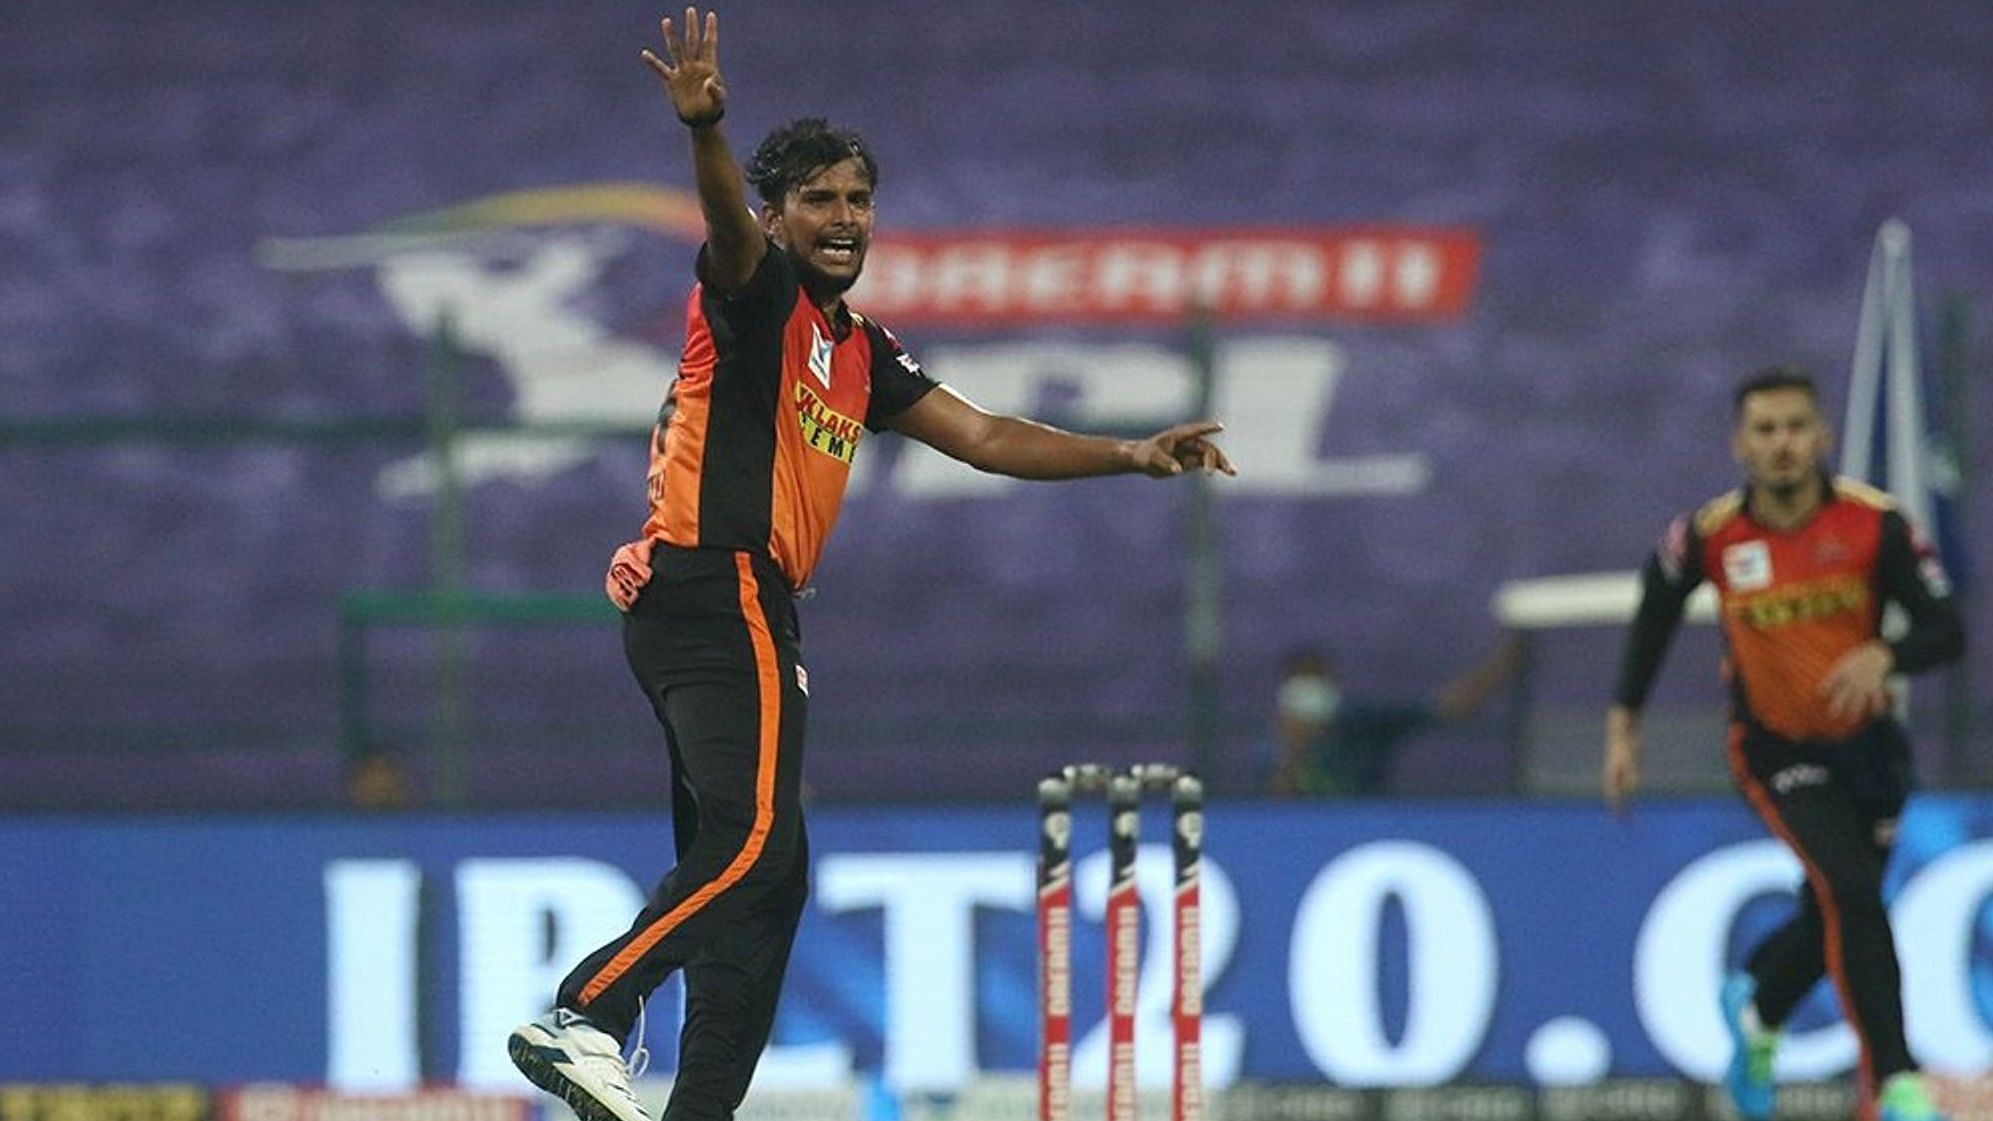 Tamil Nadu’s T Natarajan has impressed one and all, in the 3 games he has played for Sunrisers Hyderabad in IPL 2020